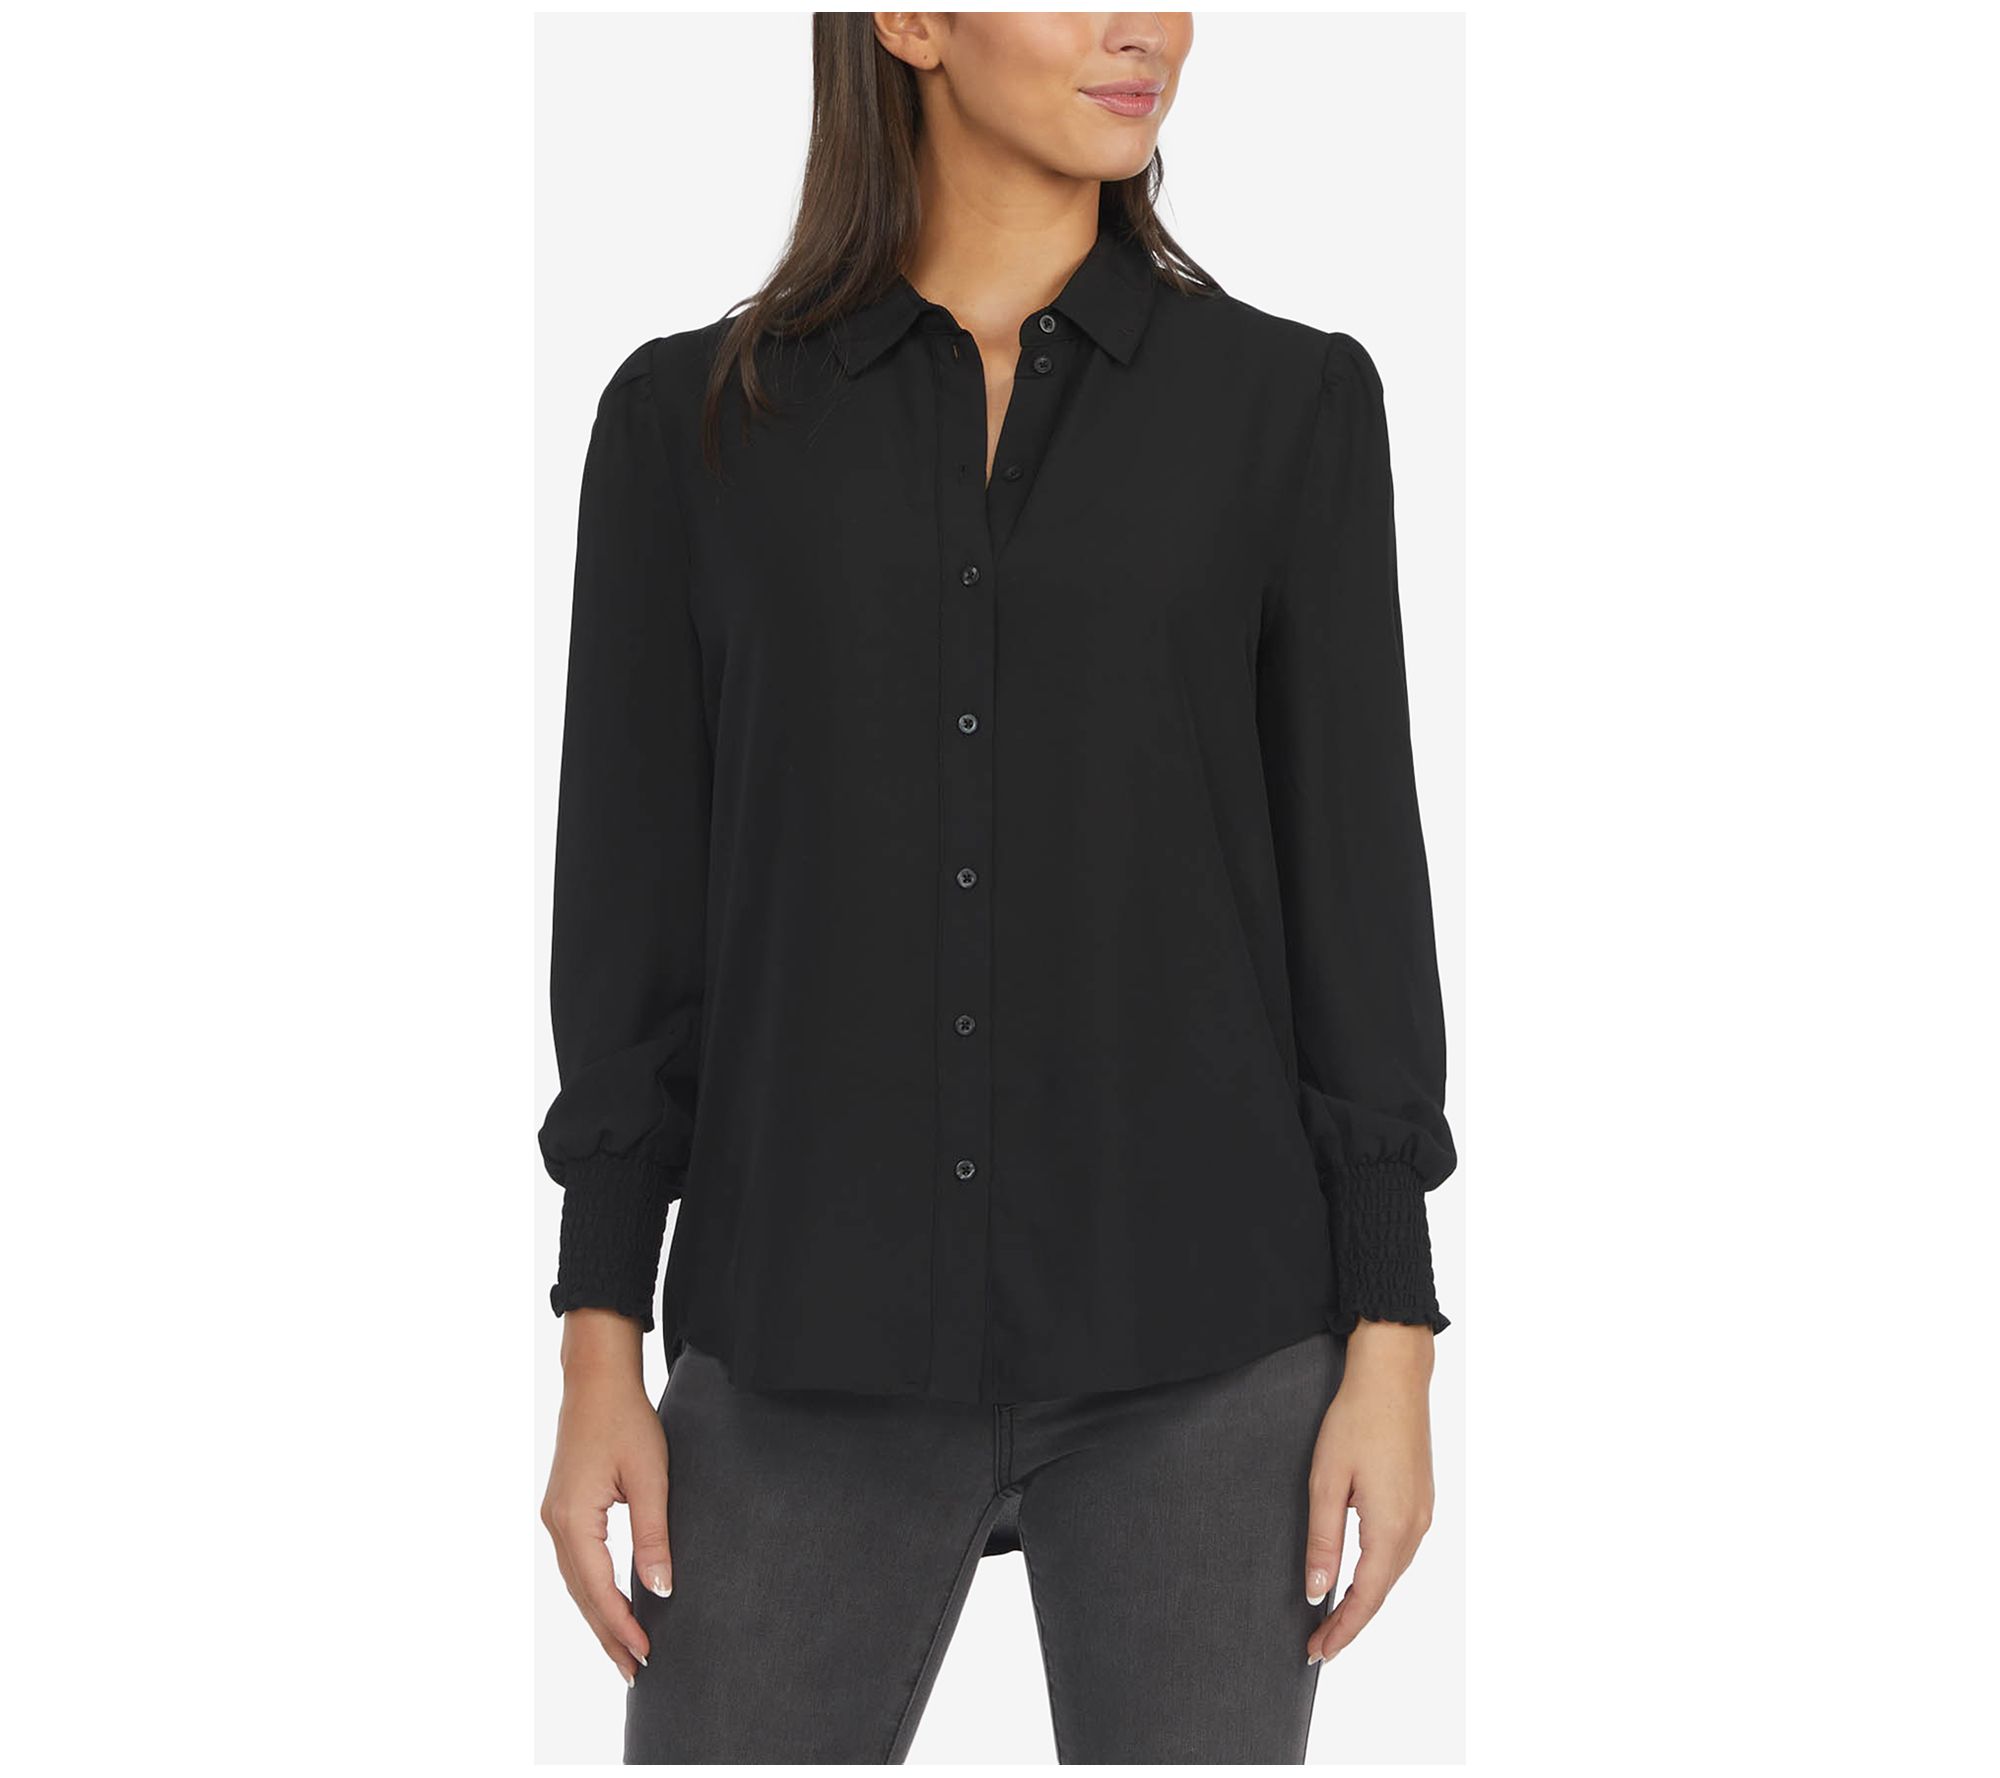 Ellen Tracy Women's Blouse with Smocked Cuffs - QVC.com